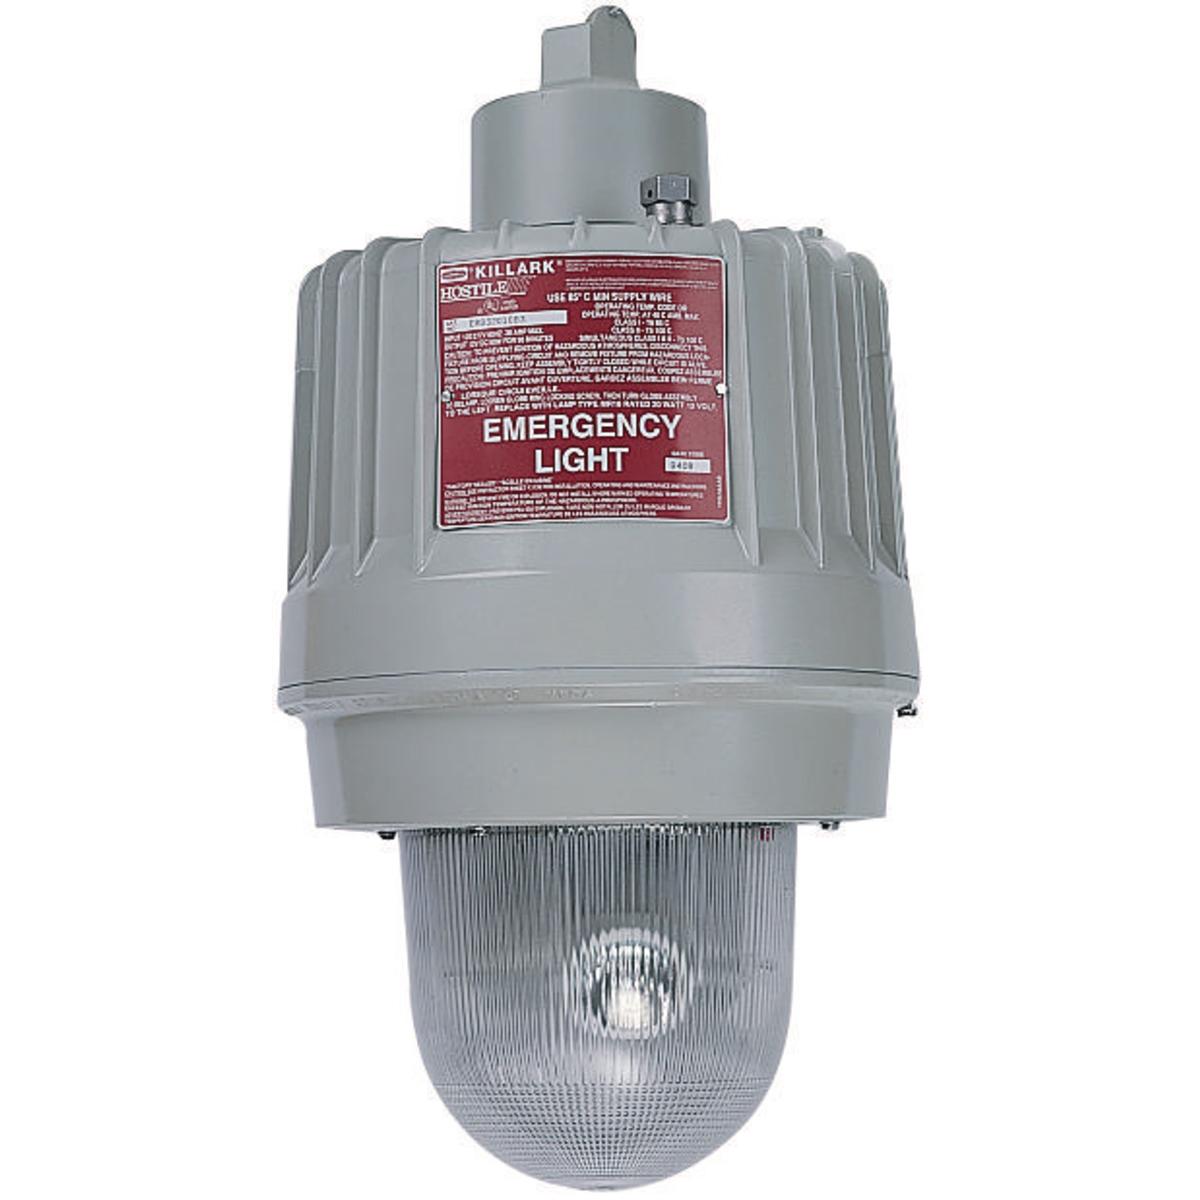 Hubbell EBB32010B24X EBB Series Emergency Hazardous Location Three Lamp 3/4" Wall Mount Class 1 N4  ; Patented design three high intensity lamps can be independently adjusted to provide custom emergency lighting to a specific area ; Three 20 watt MR16 lamps included ; Pendant